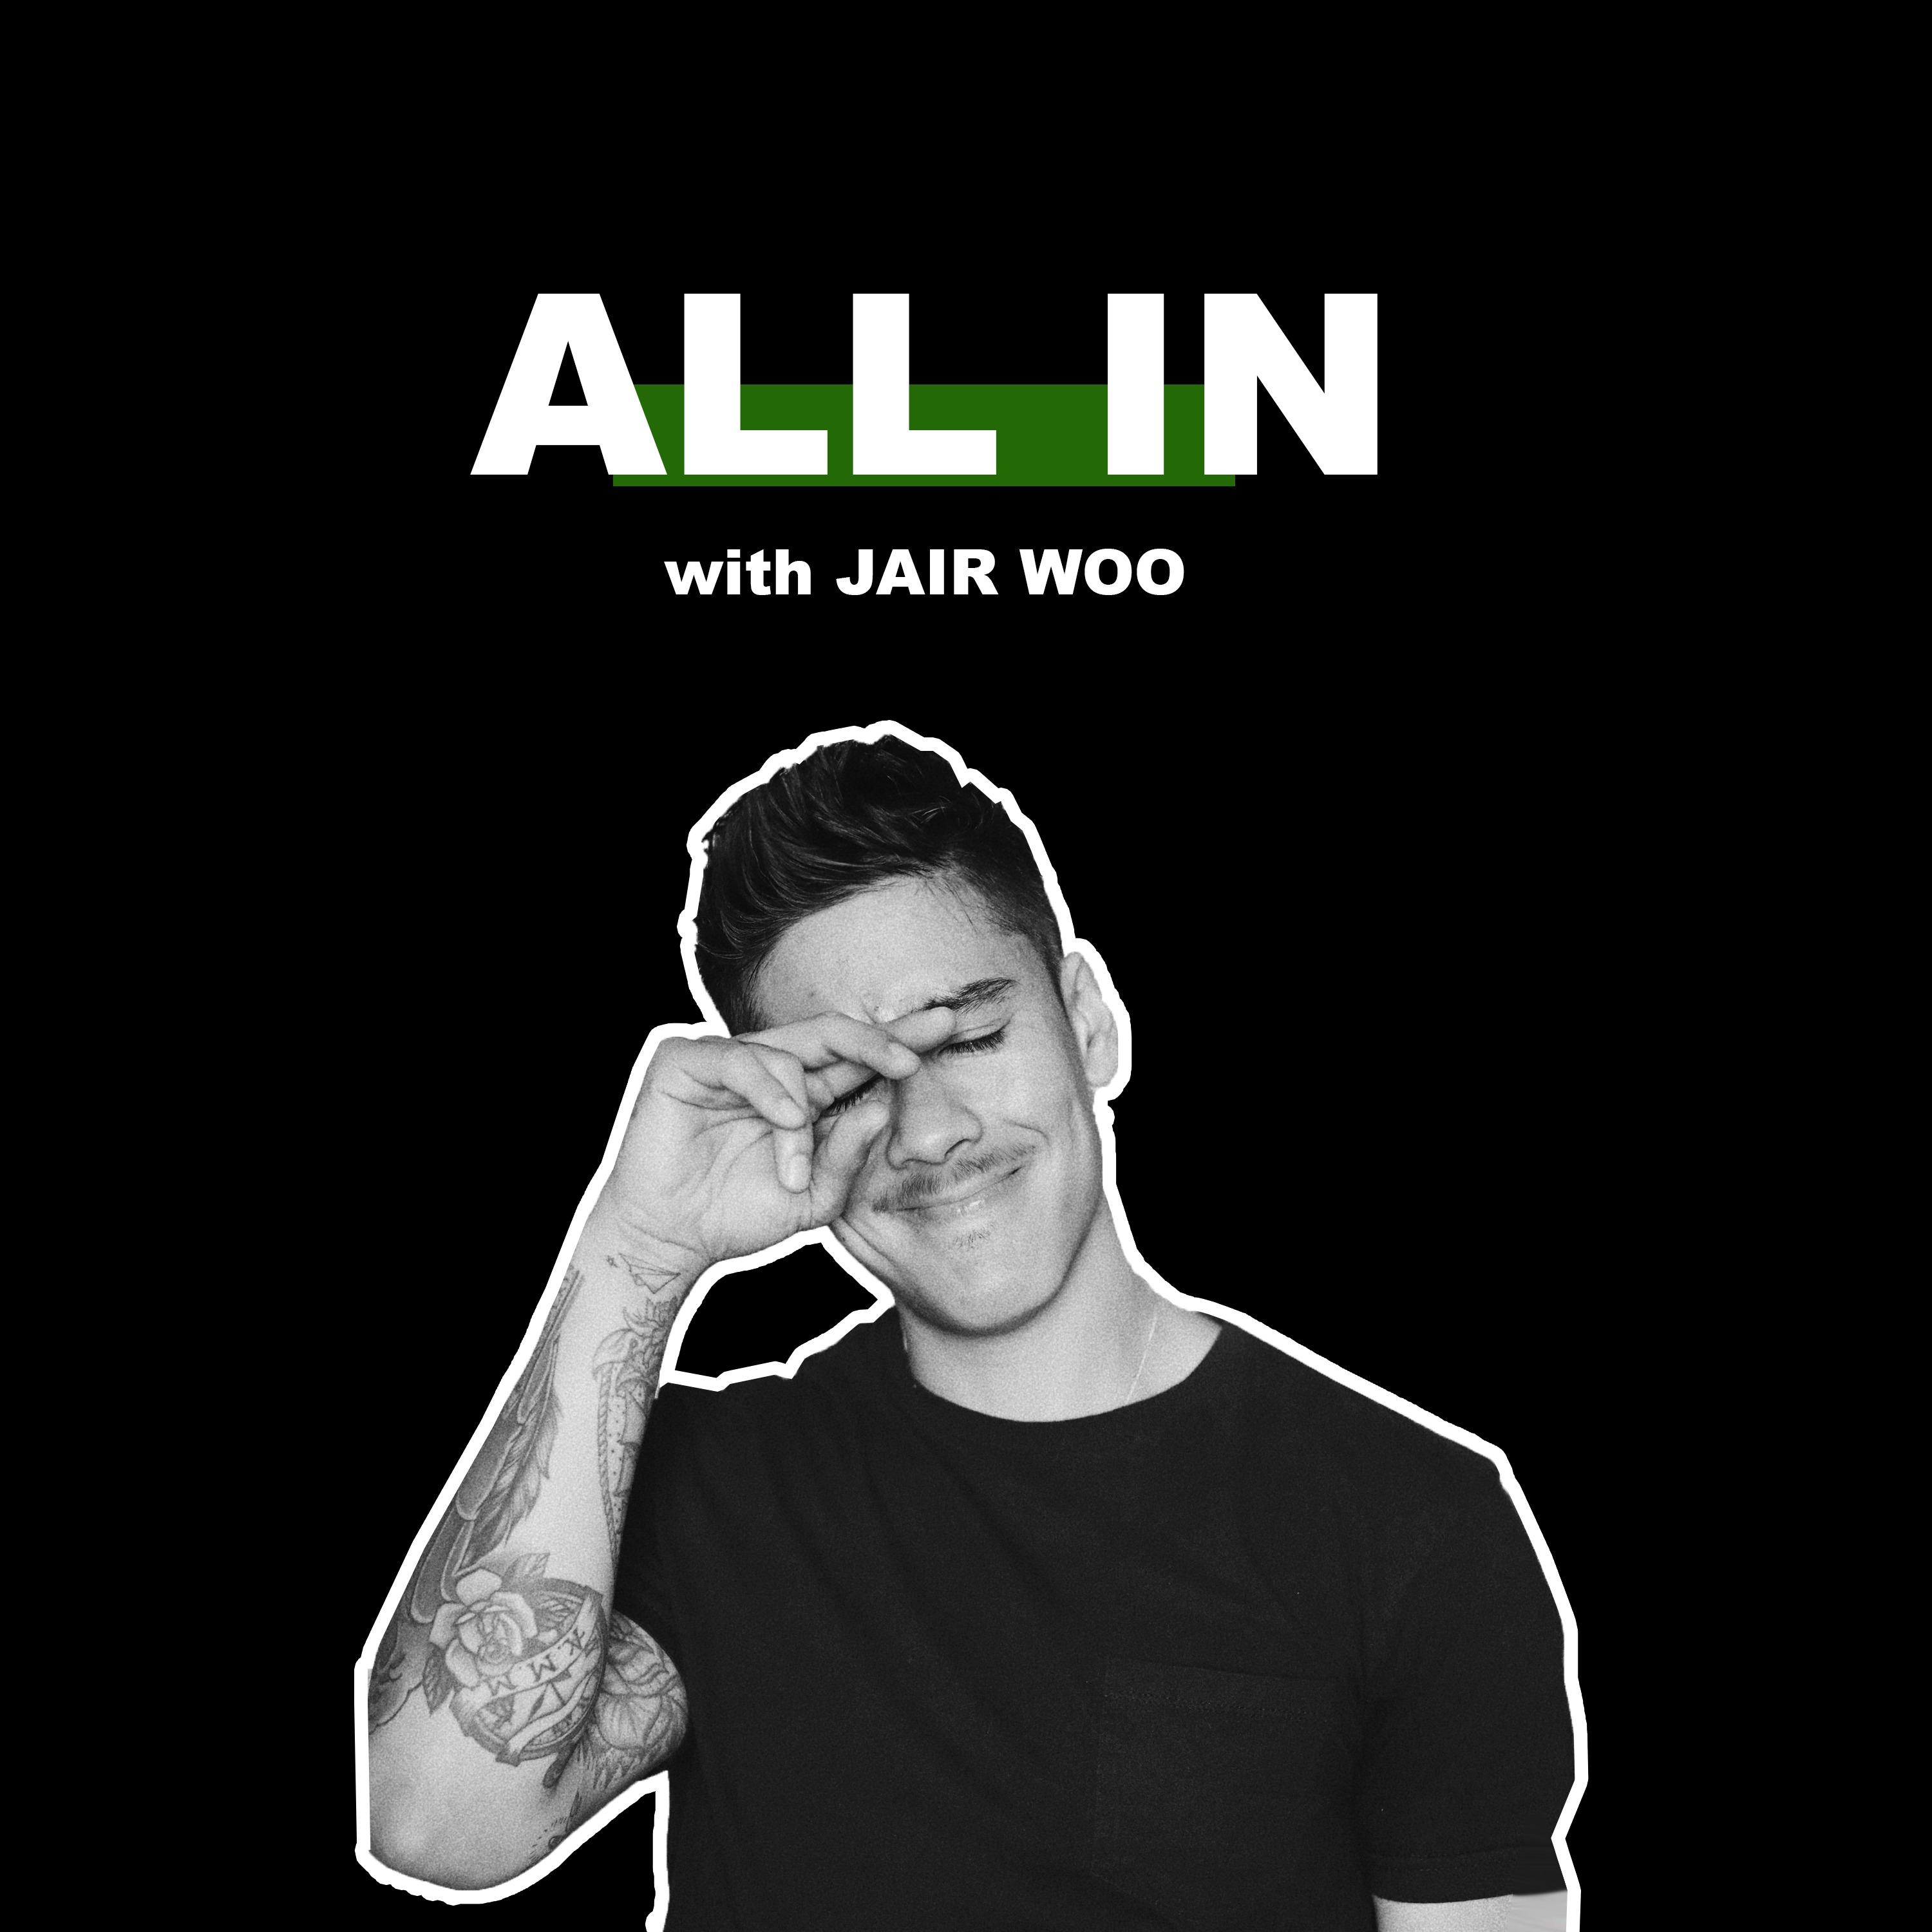 ALL IN with JAIR WOO